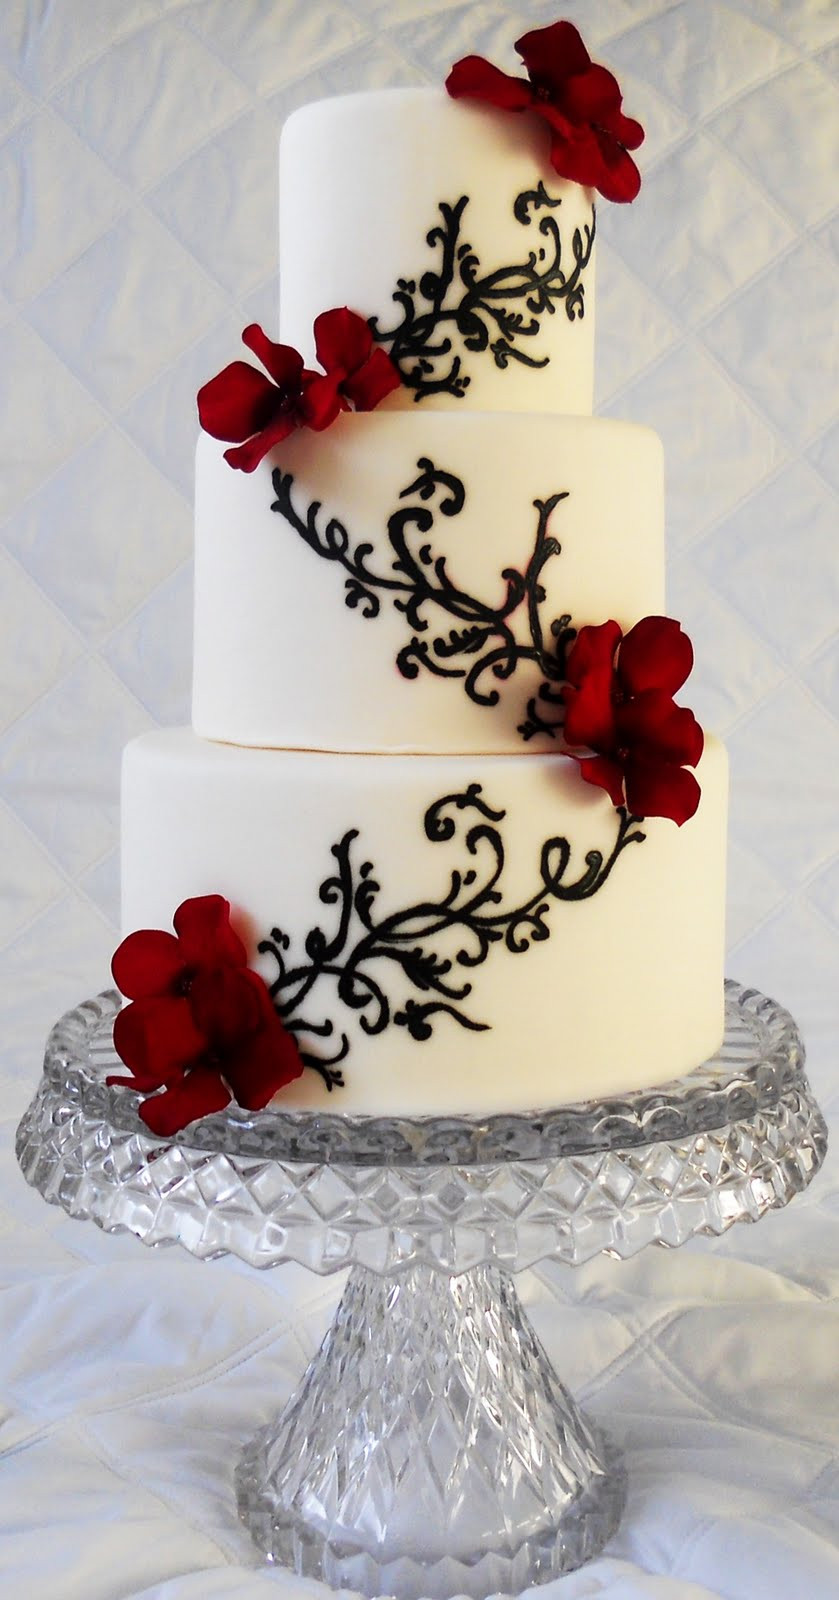 Red And Black Wedding Cakes
 Memorable Wedding Find the Best Red Black and White